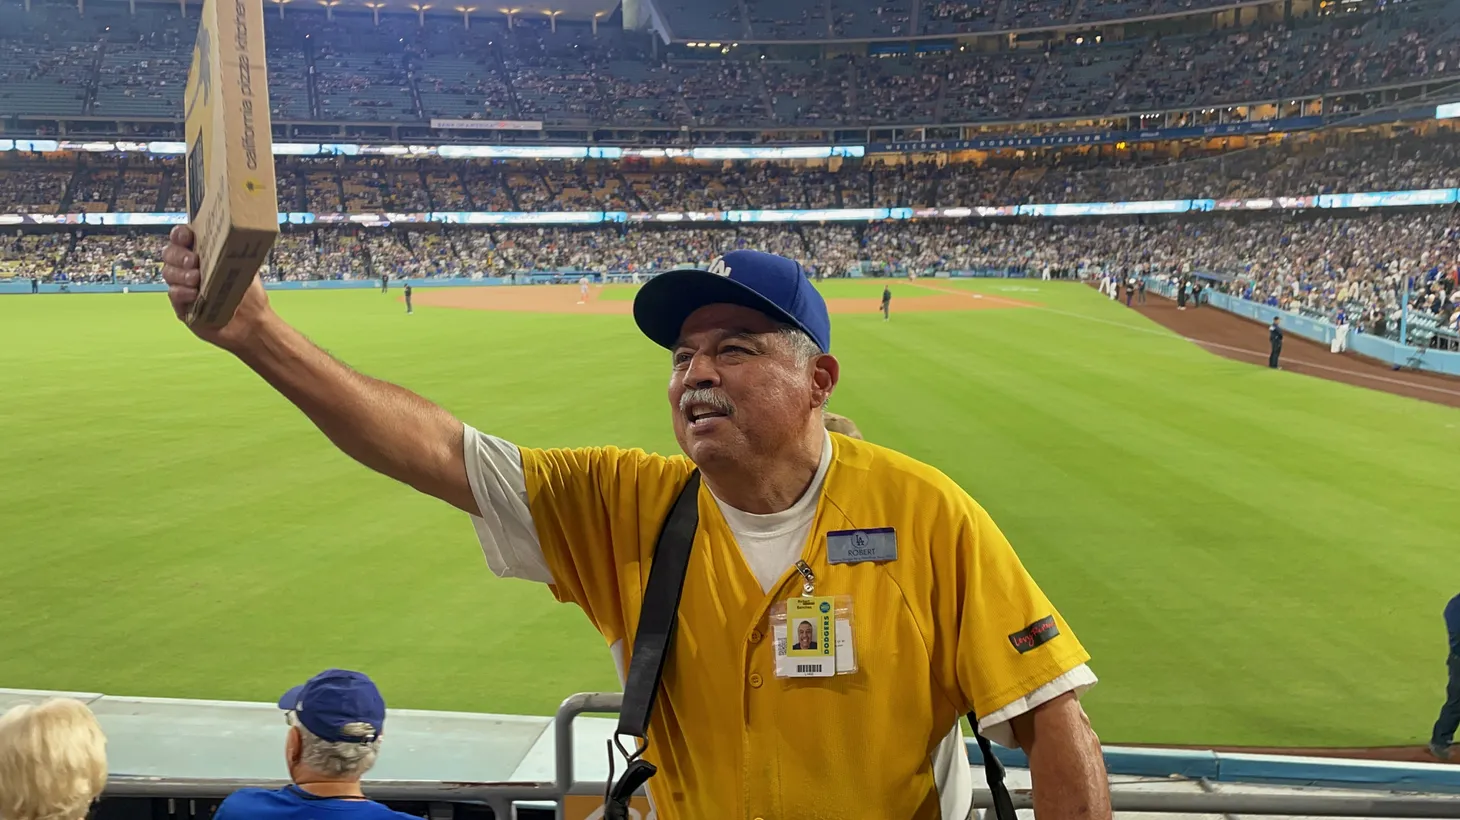 Robert Sanchez (a.k.a. Pnutman) is now a pizza man. This is his 50th season as a food vendor at Dodger Stadium.